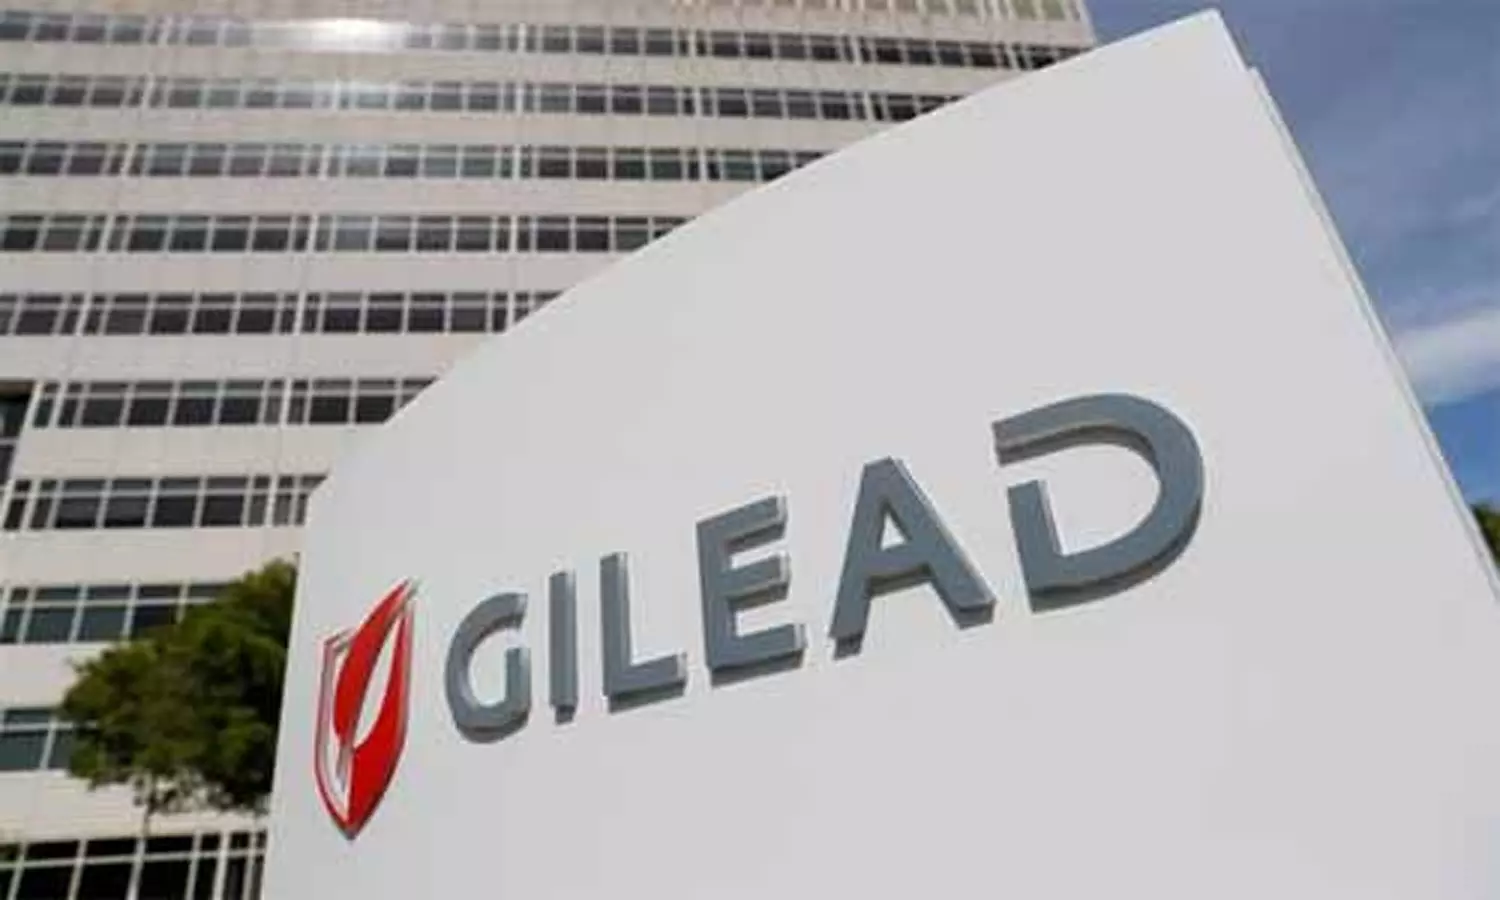 Gilead Sciences, Merck collaborate to evaluate Trodelvy in combo with Keytruda